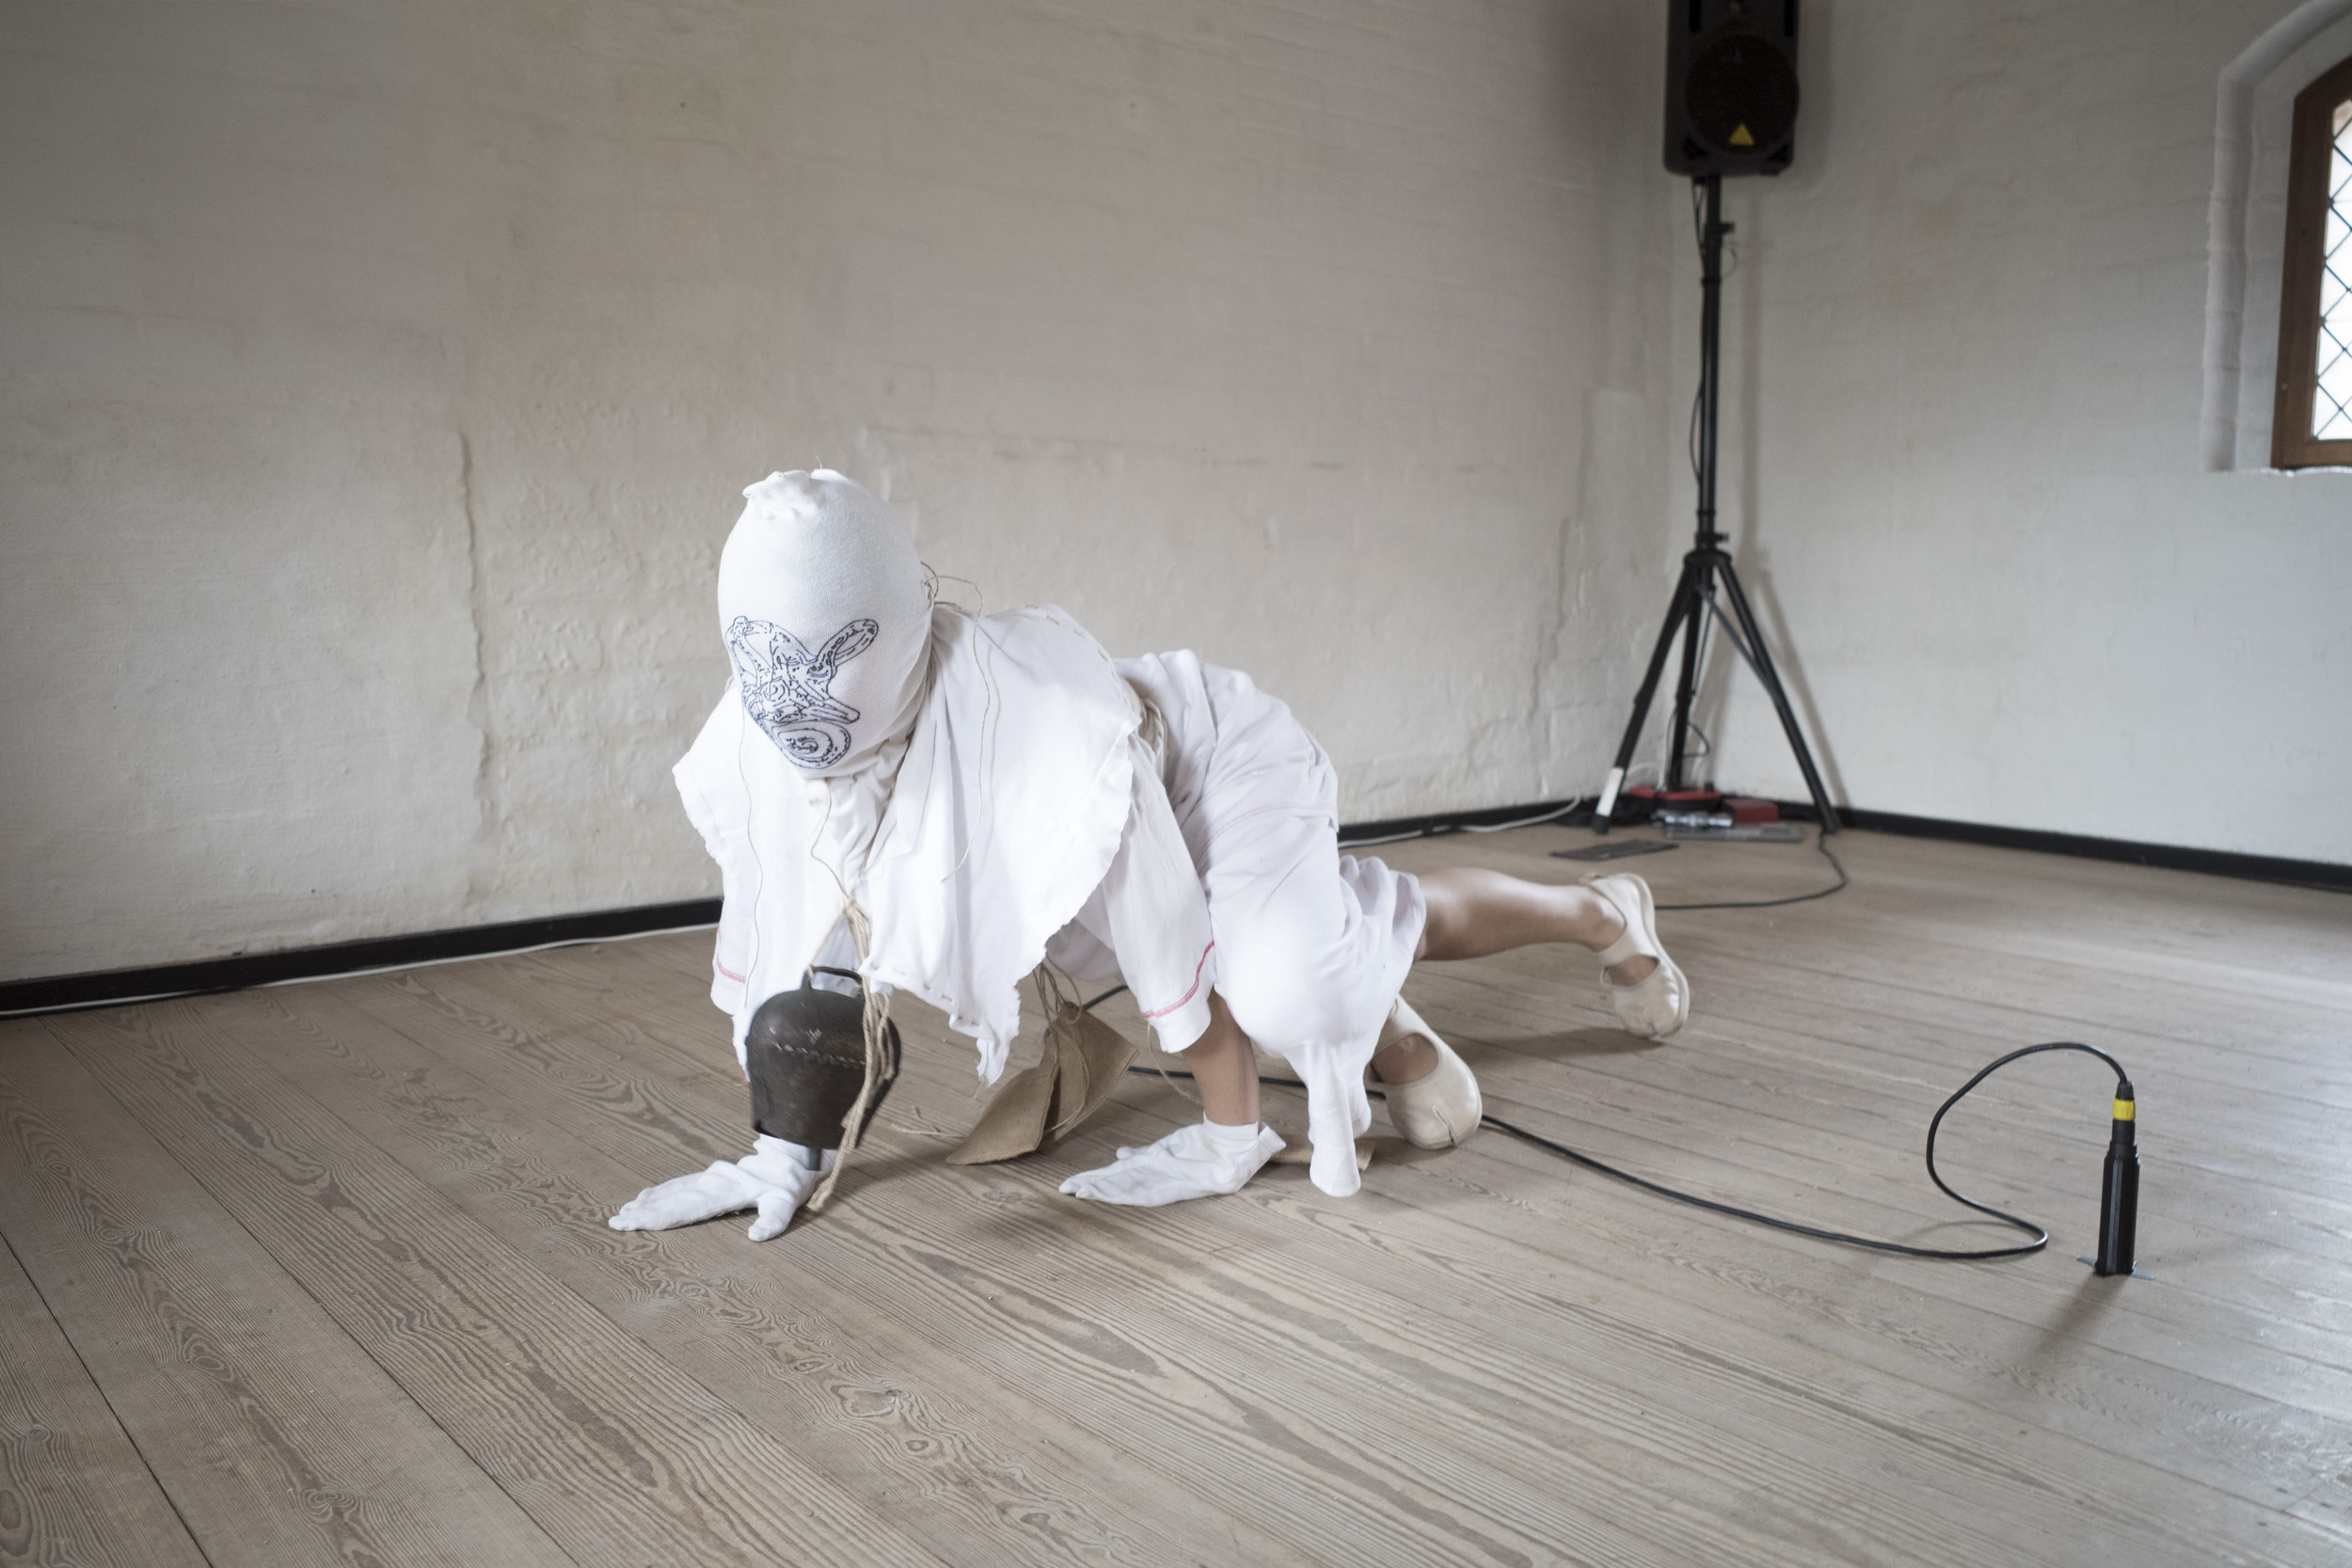 Anders Aarvik, Ayshan Qvortrup, Aske Hvitved, 0, performance (co-choreographed and performed by Ayshan Qvortrup), teasels, steel pipes, brick remains, sewn patient clothes, gauze bandage, wooden figurines (by Aske Hvitved), Variable dimensions